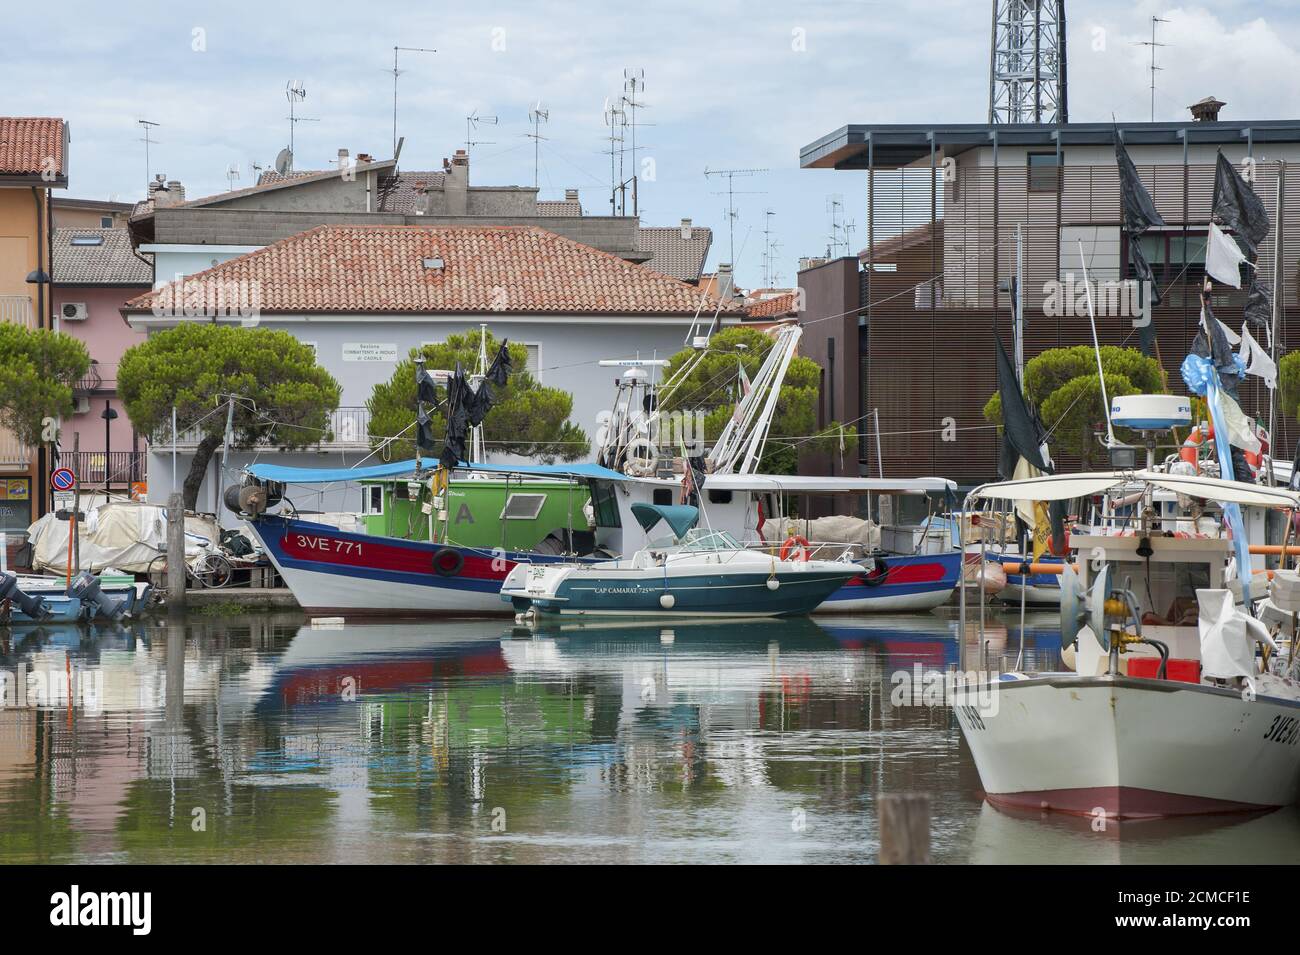 ITALY, Caorle - JULY 11, 2014: Tourist boat in the port of Caorle. Stock Photo